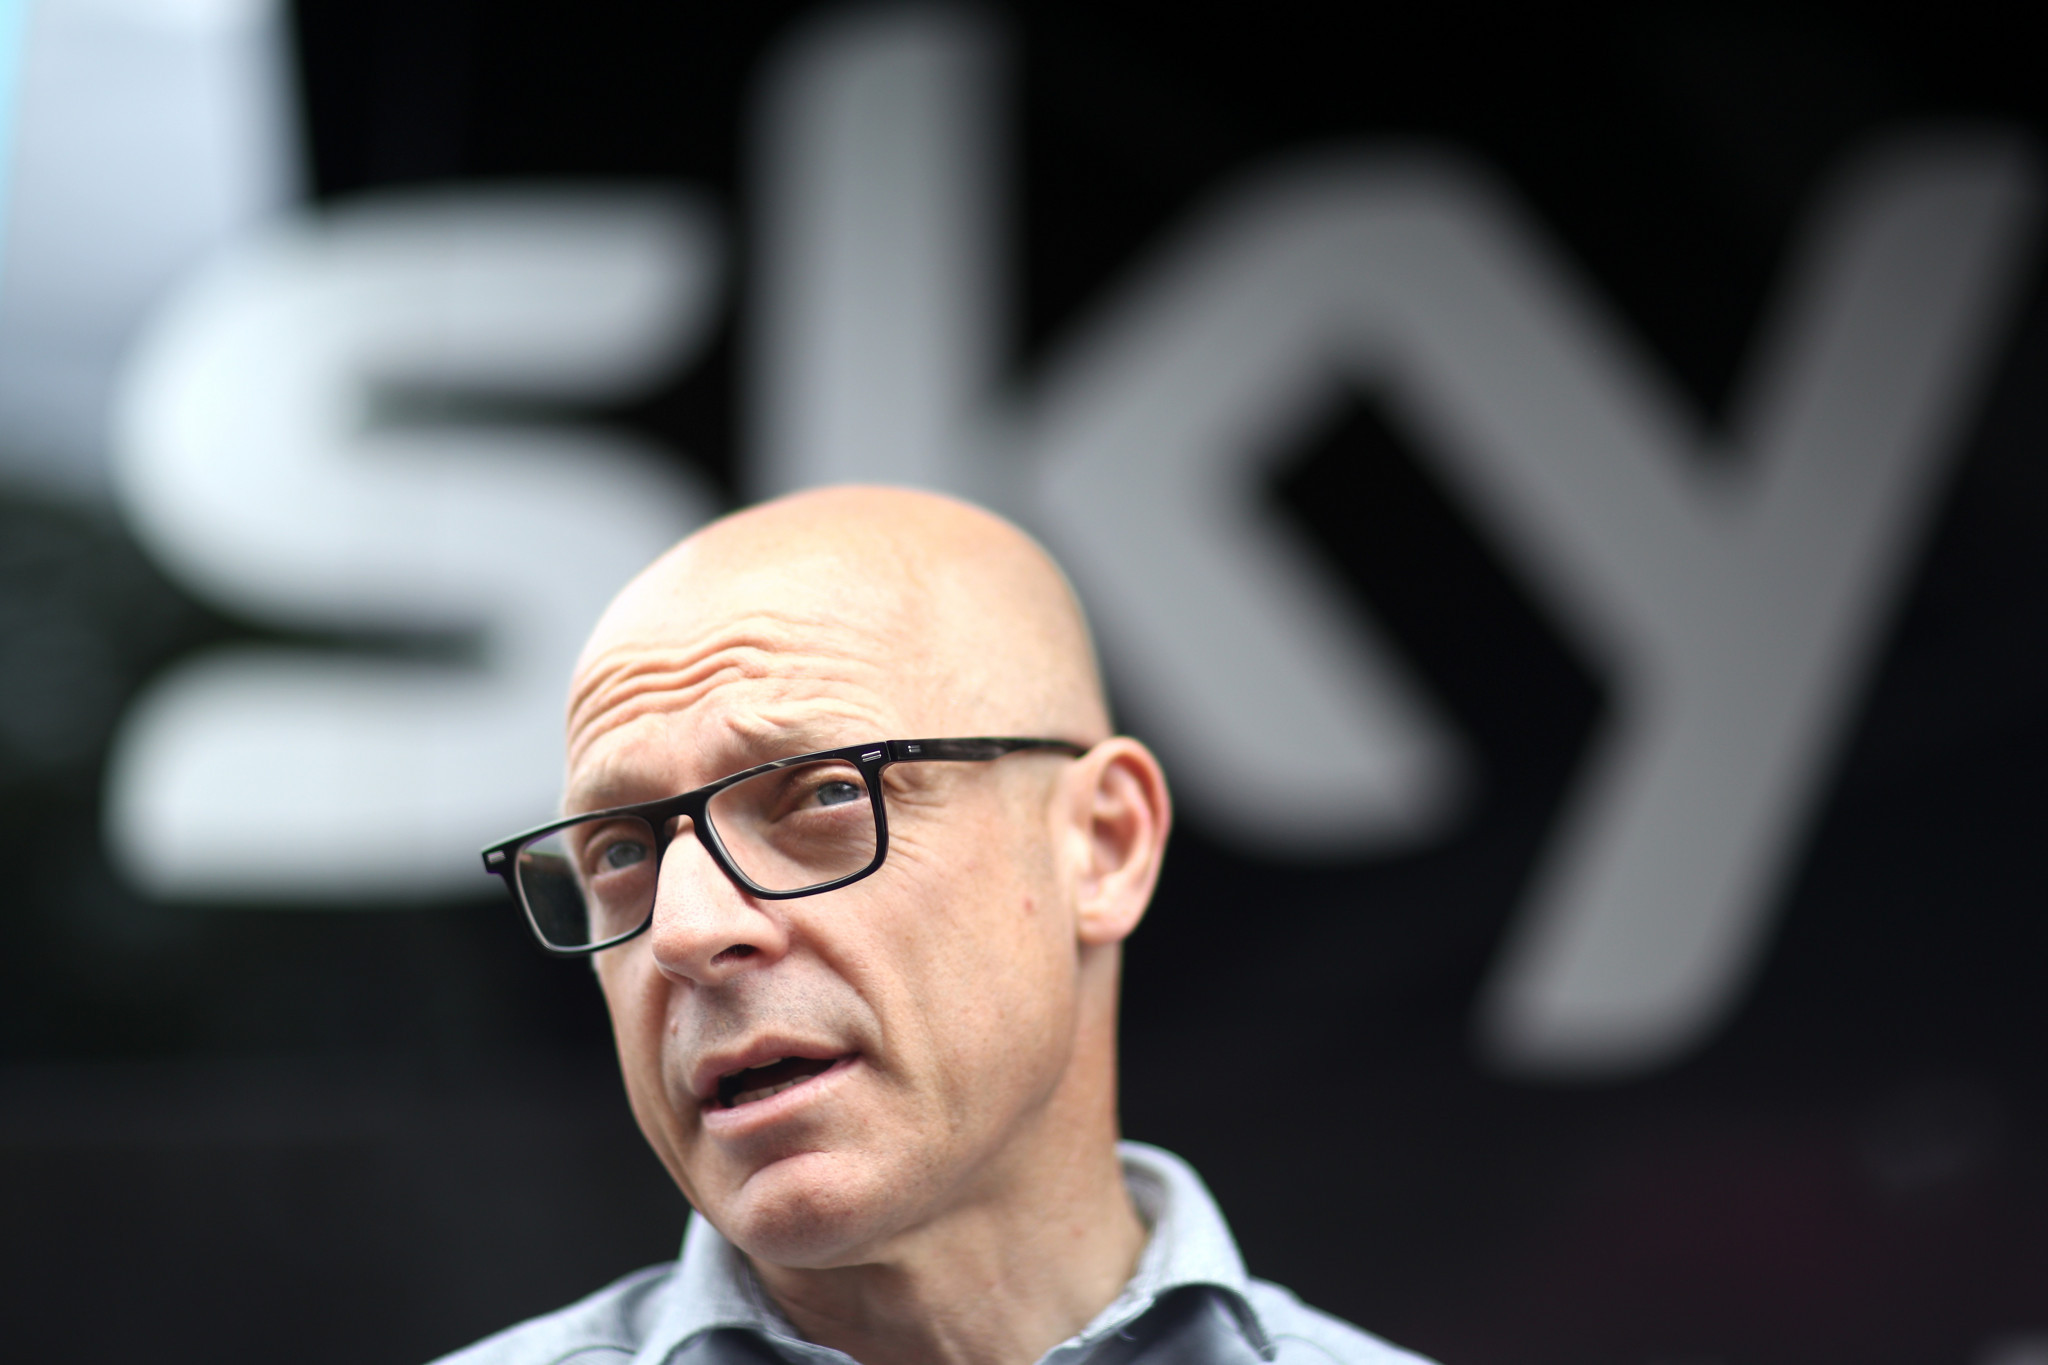 Team Sky principal Sir David Brailsford stated he was confident Chris Froome had followed medical guidance and remained within the permissible dose ©Getty Images